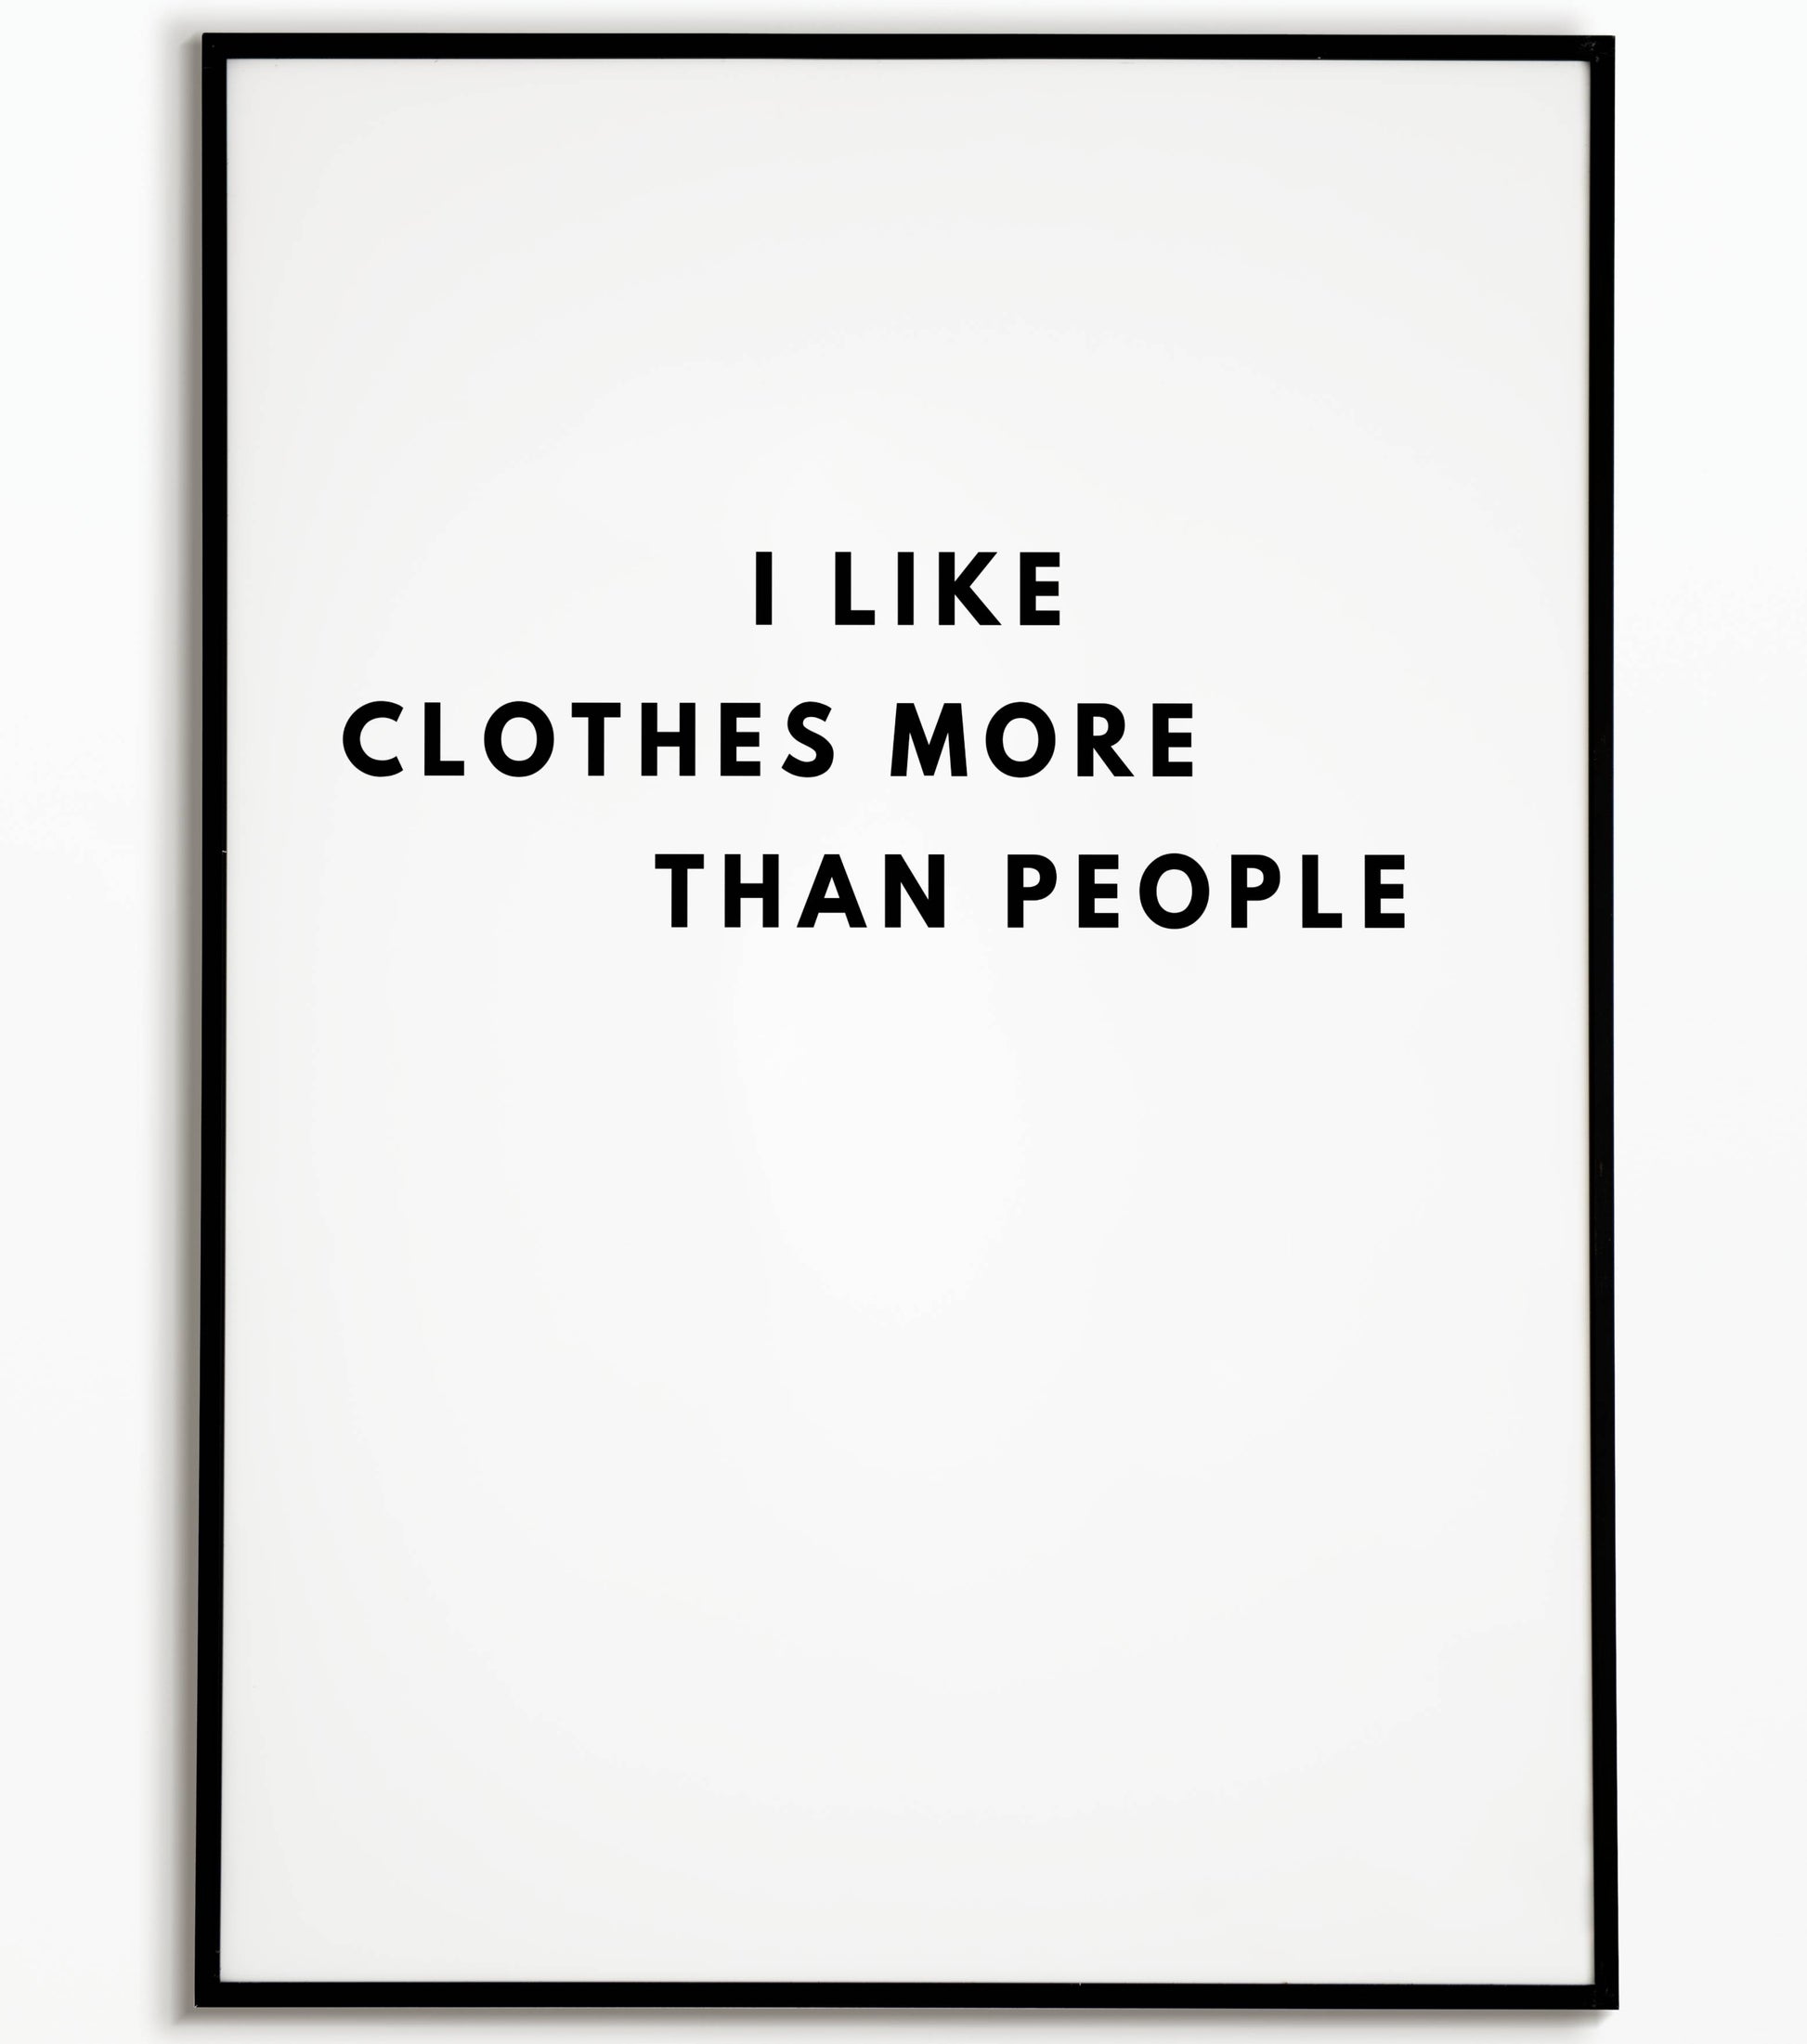 Humorous "I likes clothes more than people" printable poster, relatable for fashion lovers and introverts alike.	